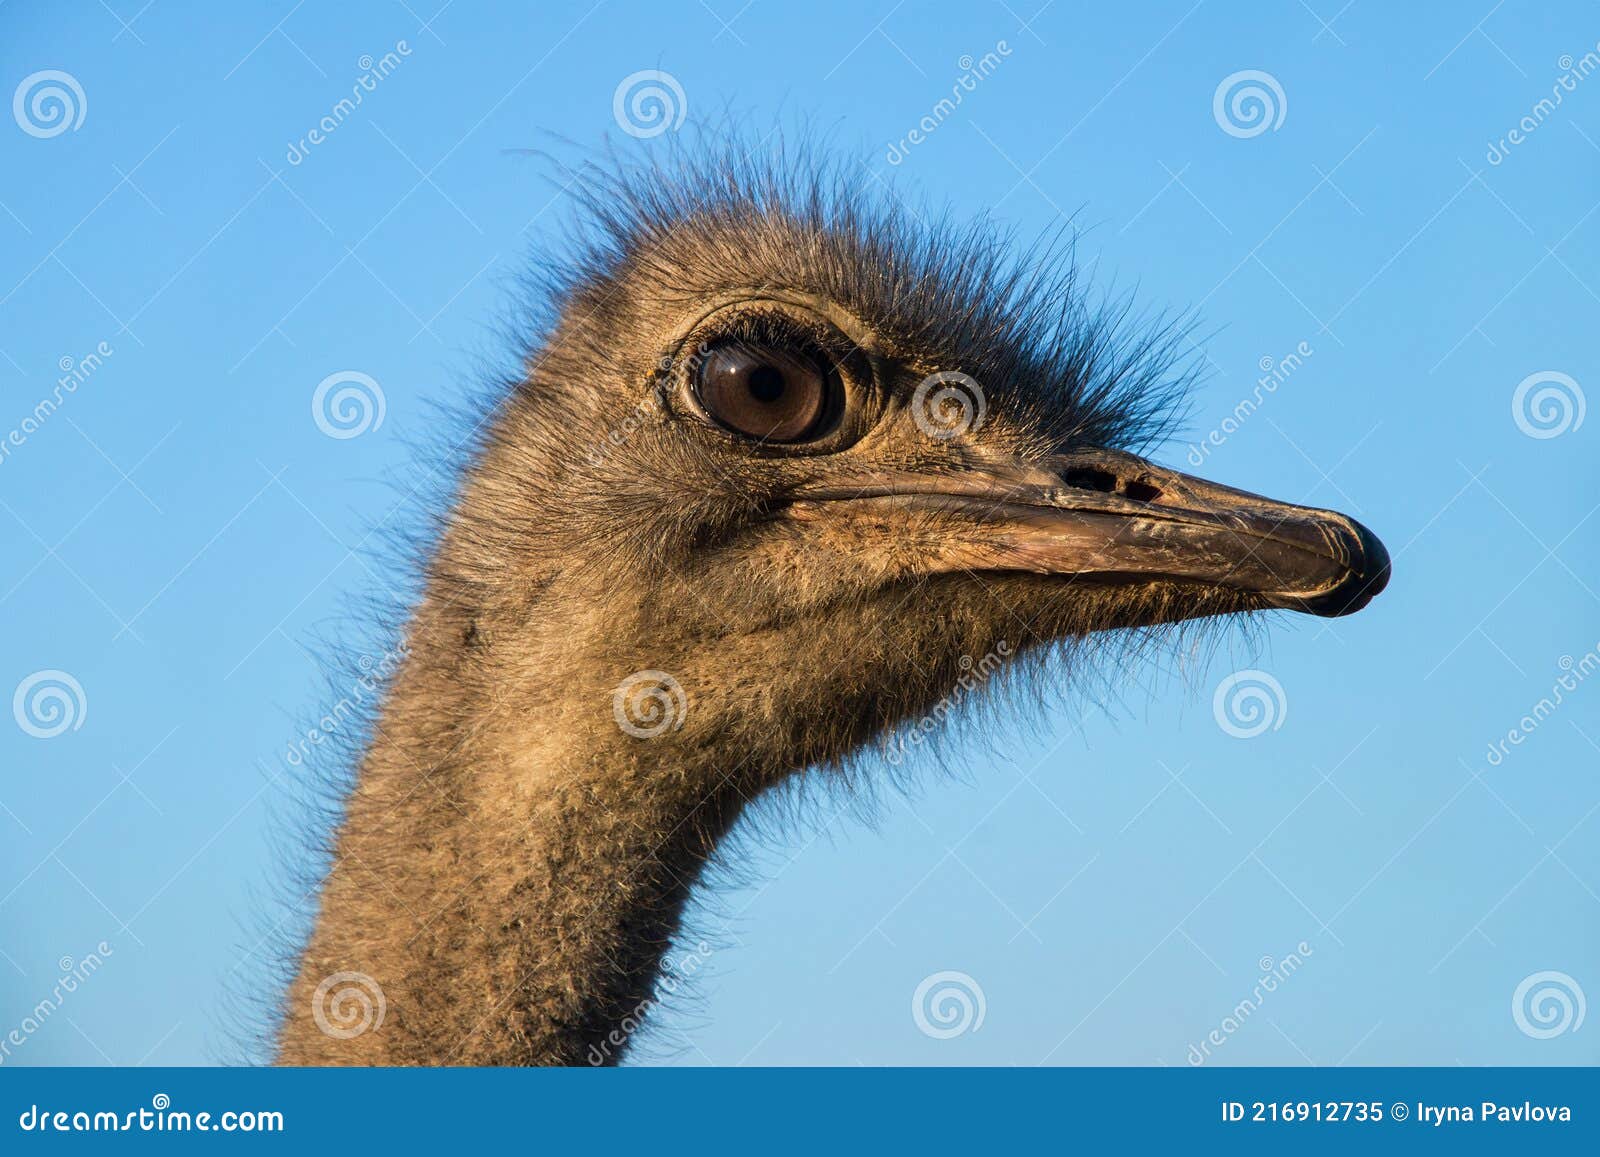 The Head of an Ostrich. Bird`s Eye Close-up. Breeding and Conservation of  Exotic Animals and Birds Stock Image - Image of background, beak: 216912735